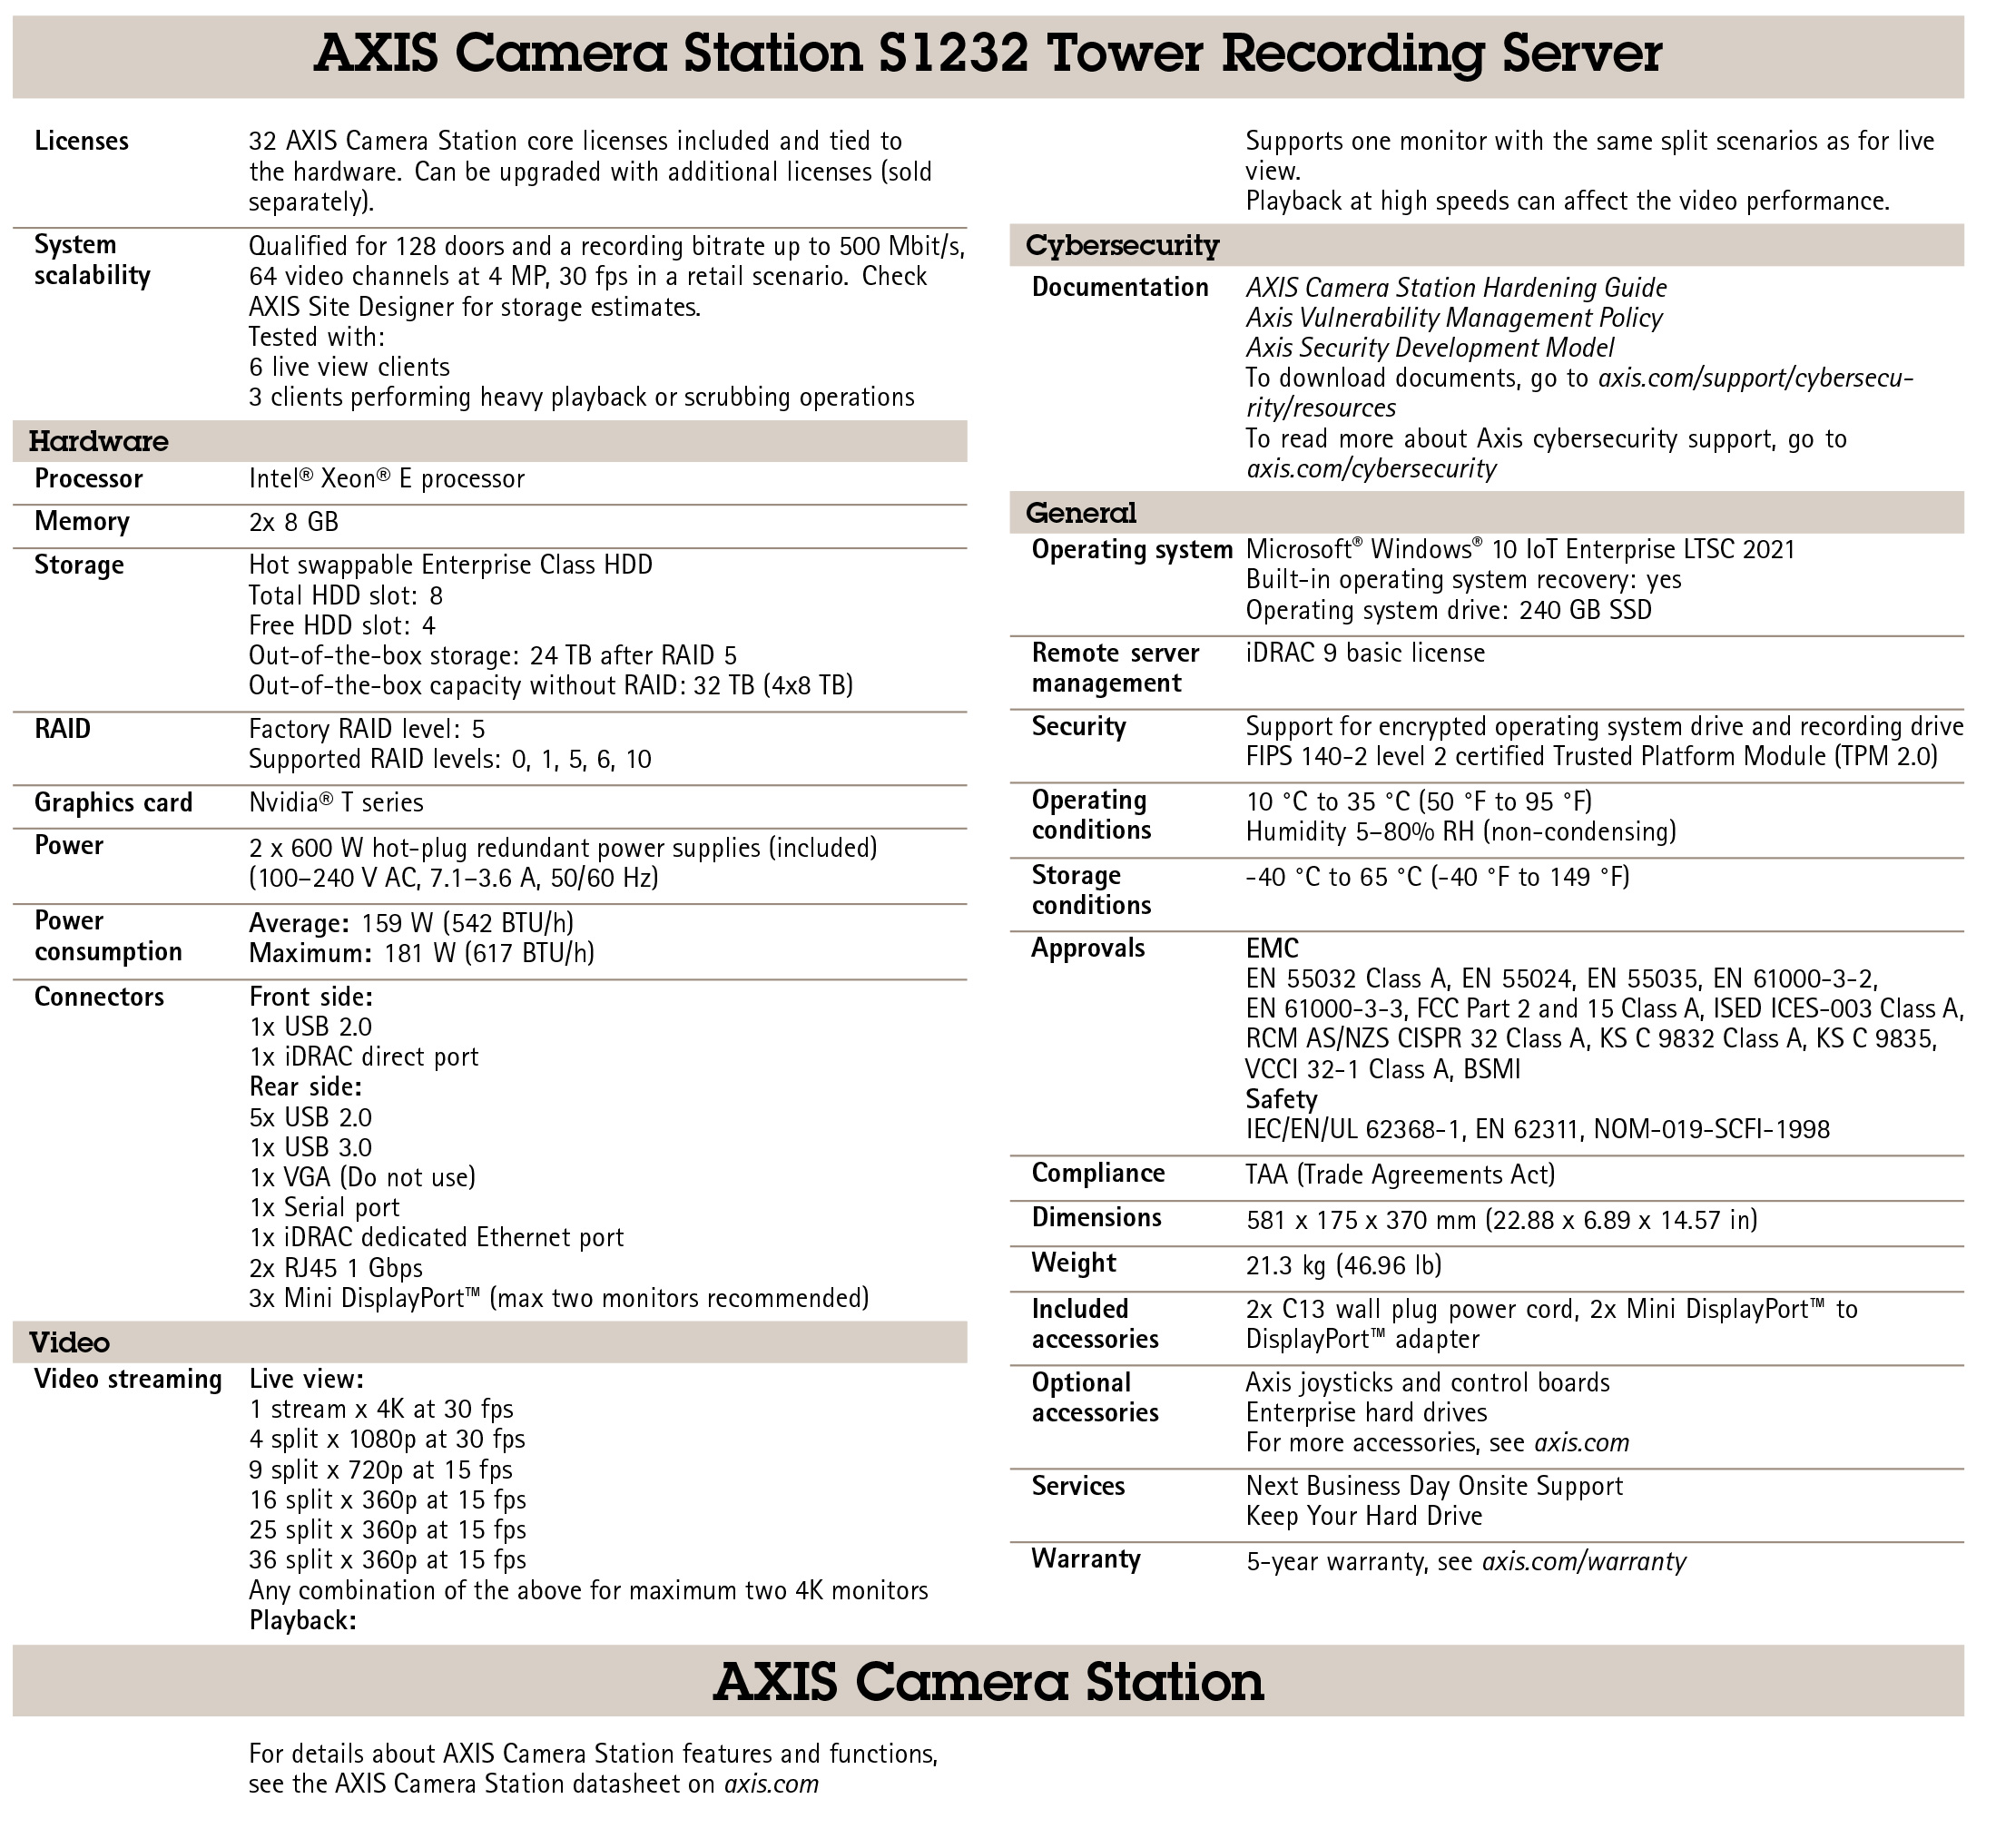 AXIS Camera Station S1232 Tower Recording Server